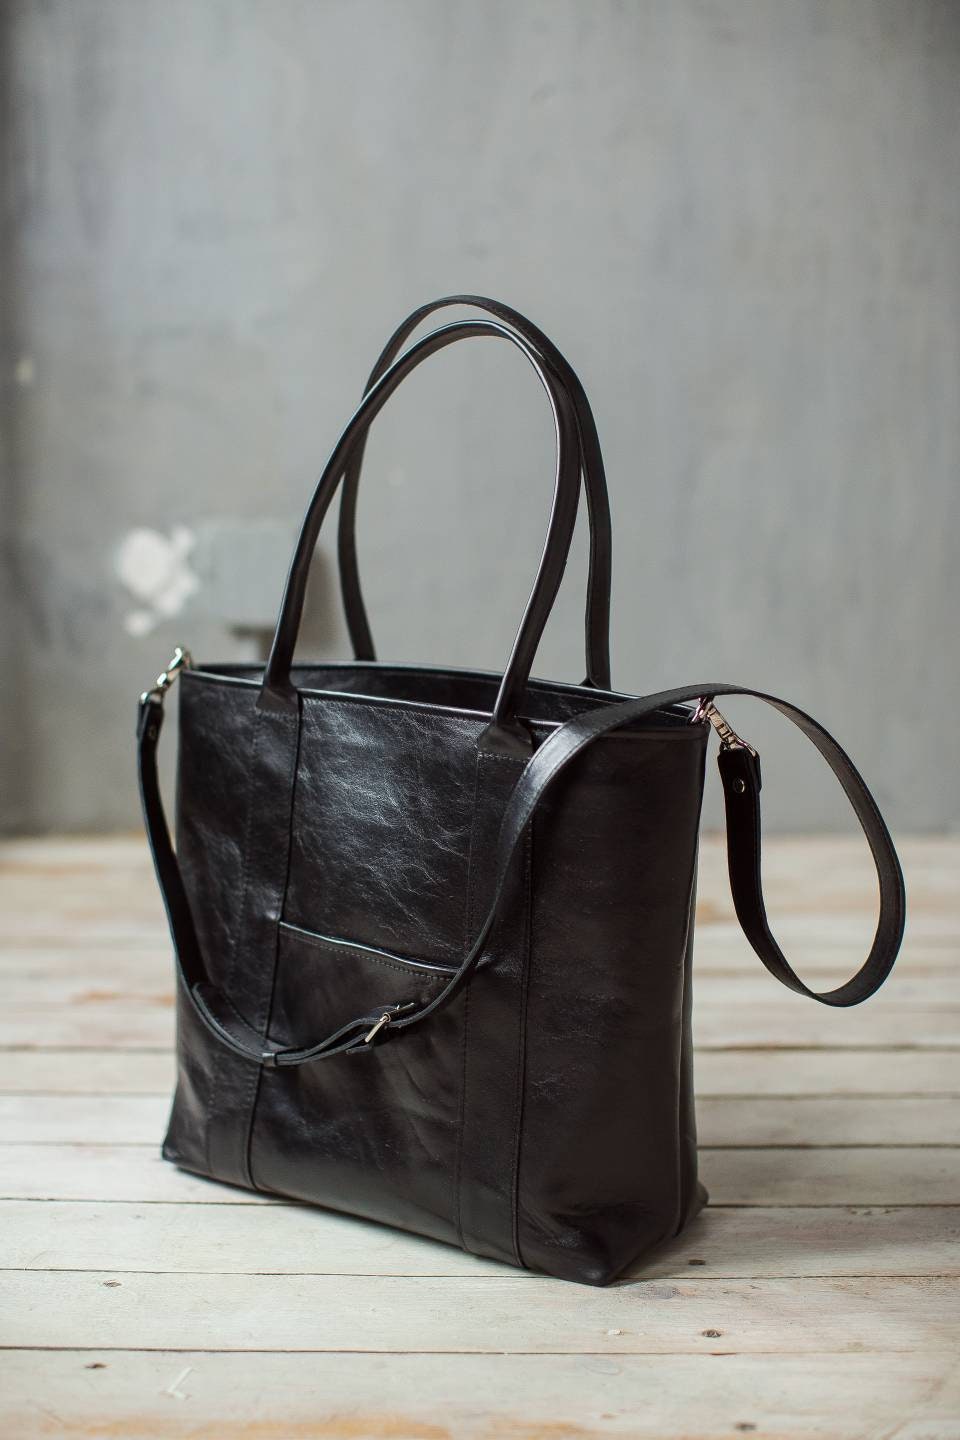 Leather Tote Bag Black Leather Tote Laptop Leather Bag - Etsy